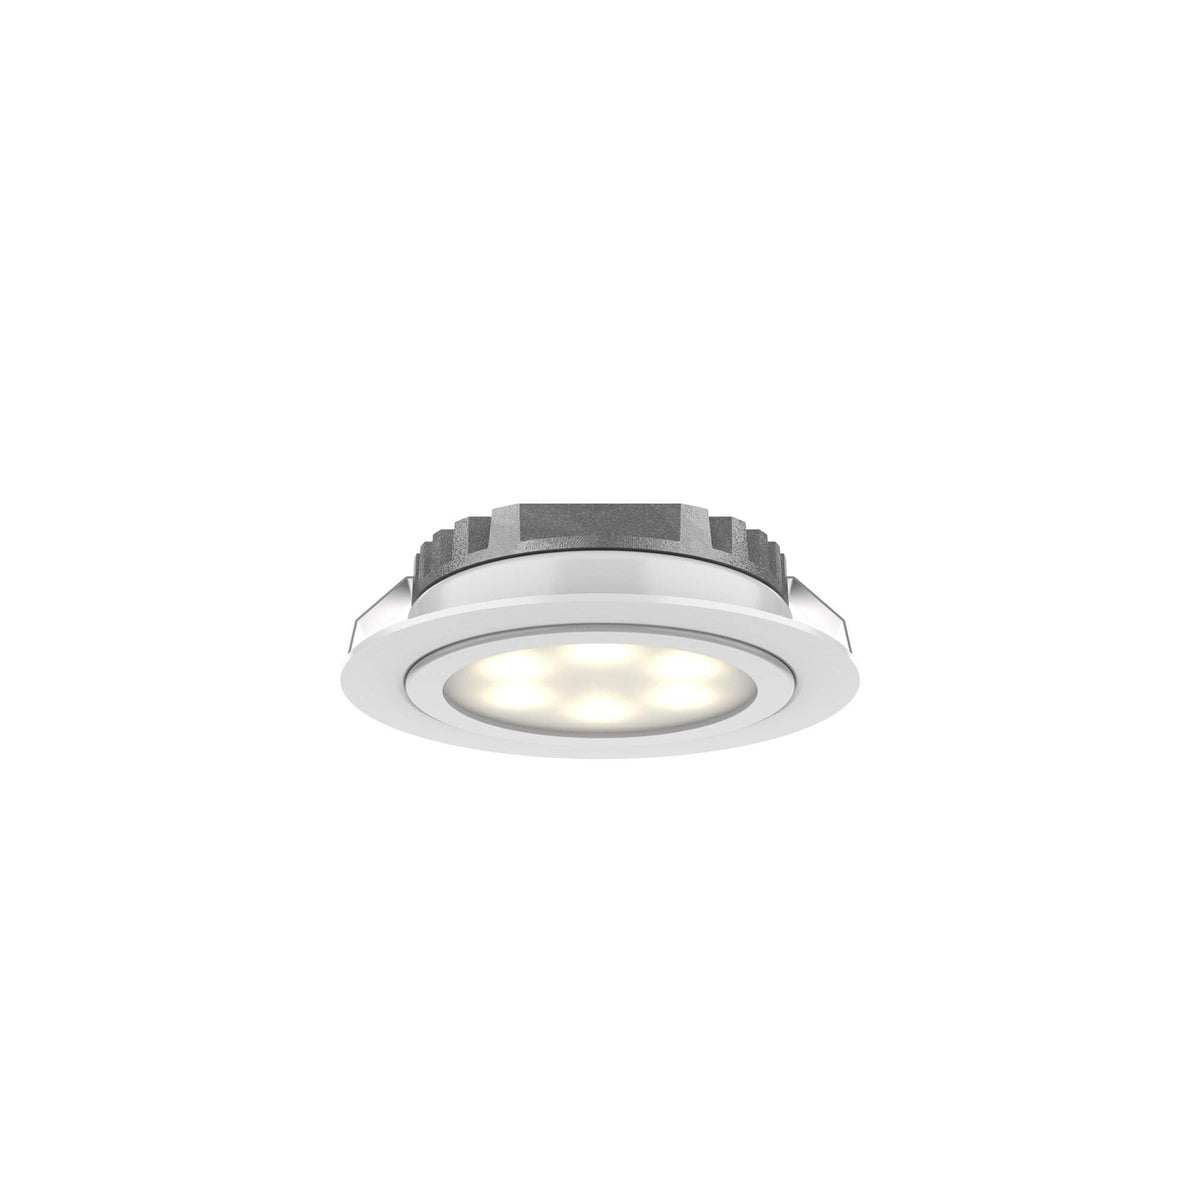 DALS Lighting - 4005 Series High Power LED Puck - 4005HP-WH | Montreal Lighting & Hardware